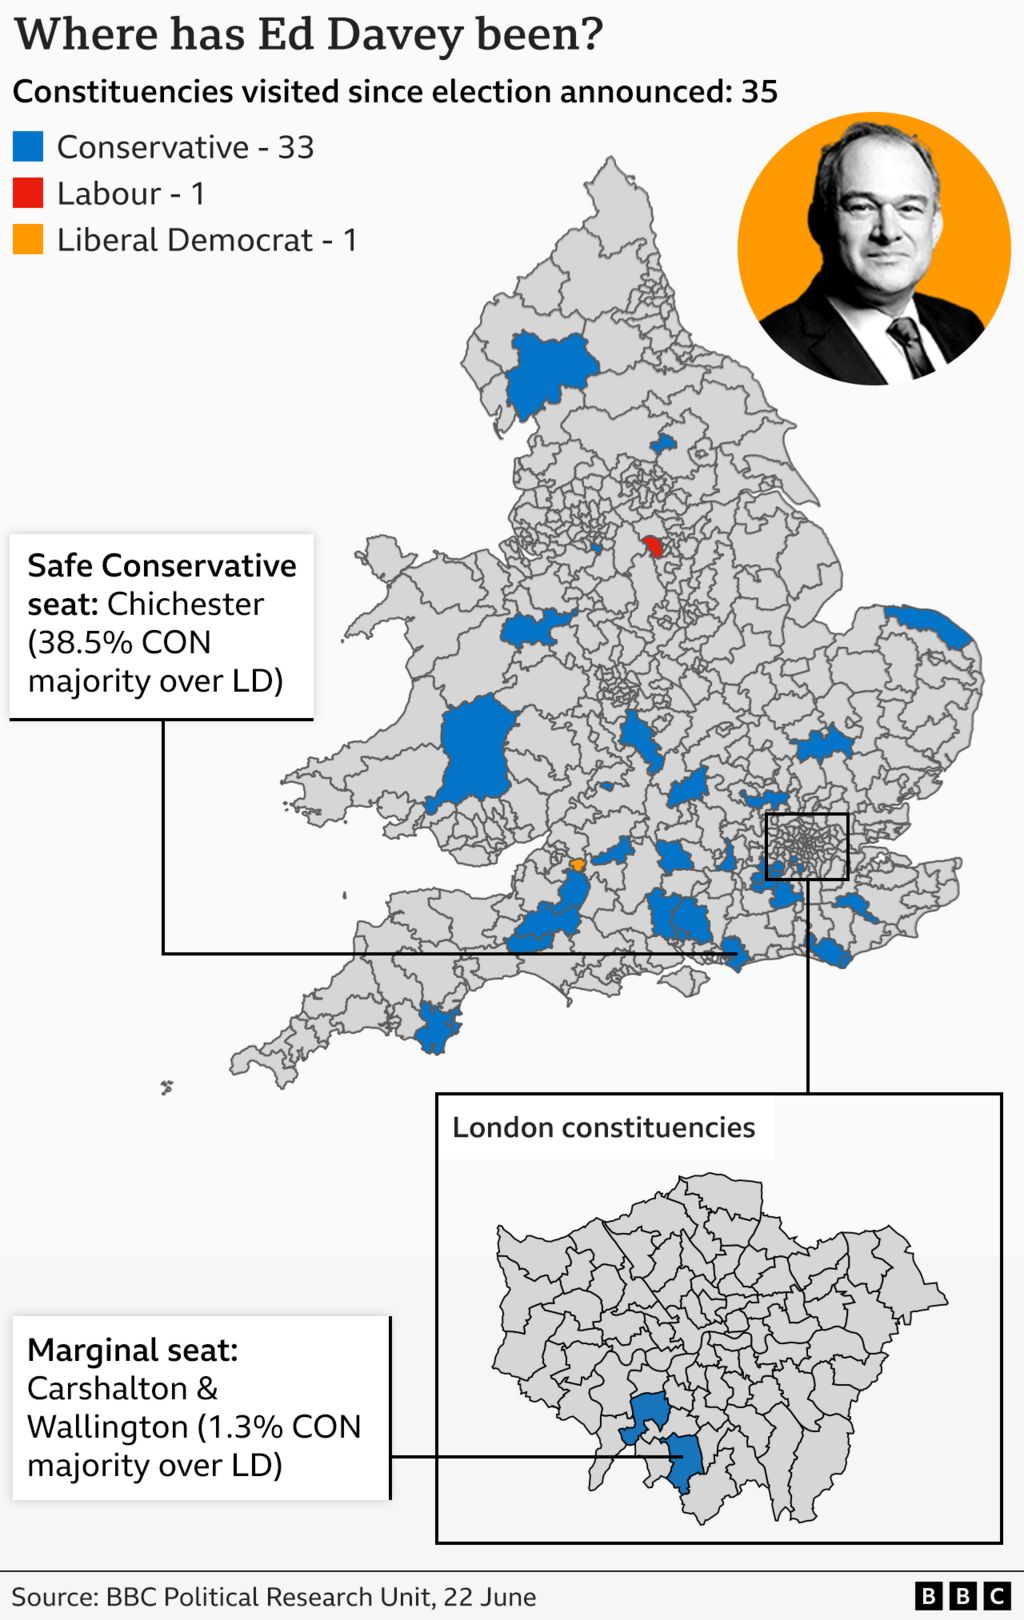 Map showing the constituencies Ed Davey has visited since the election was called - 33 are Conservative, one is Lib Dem and one is Labour